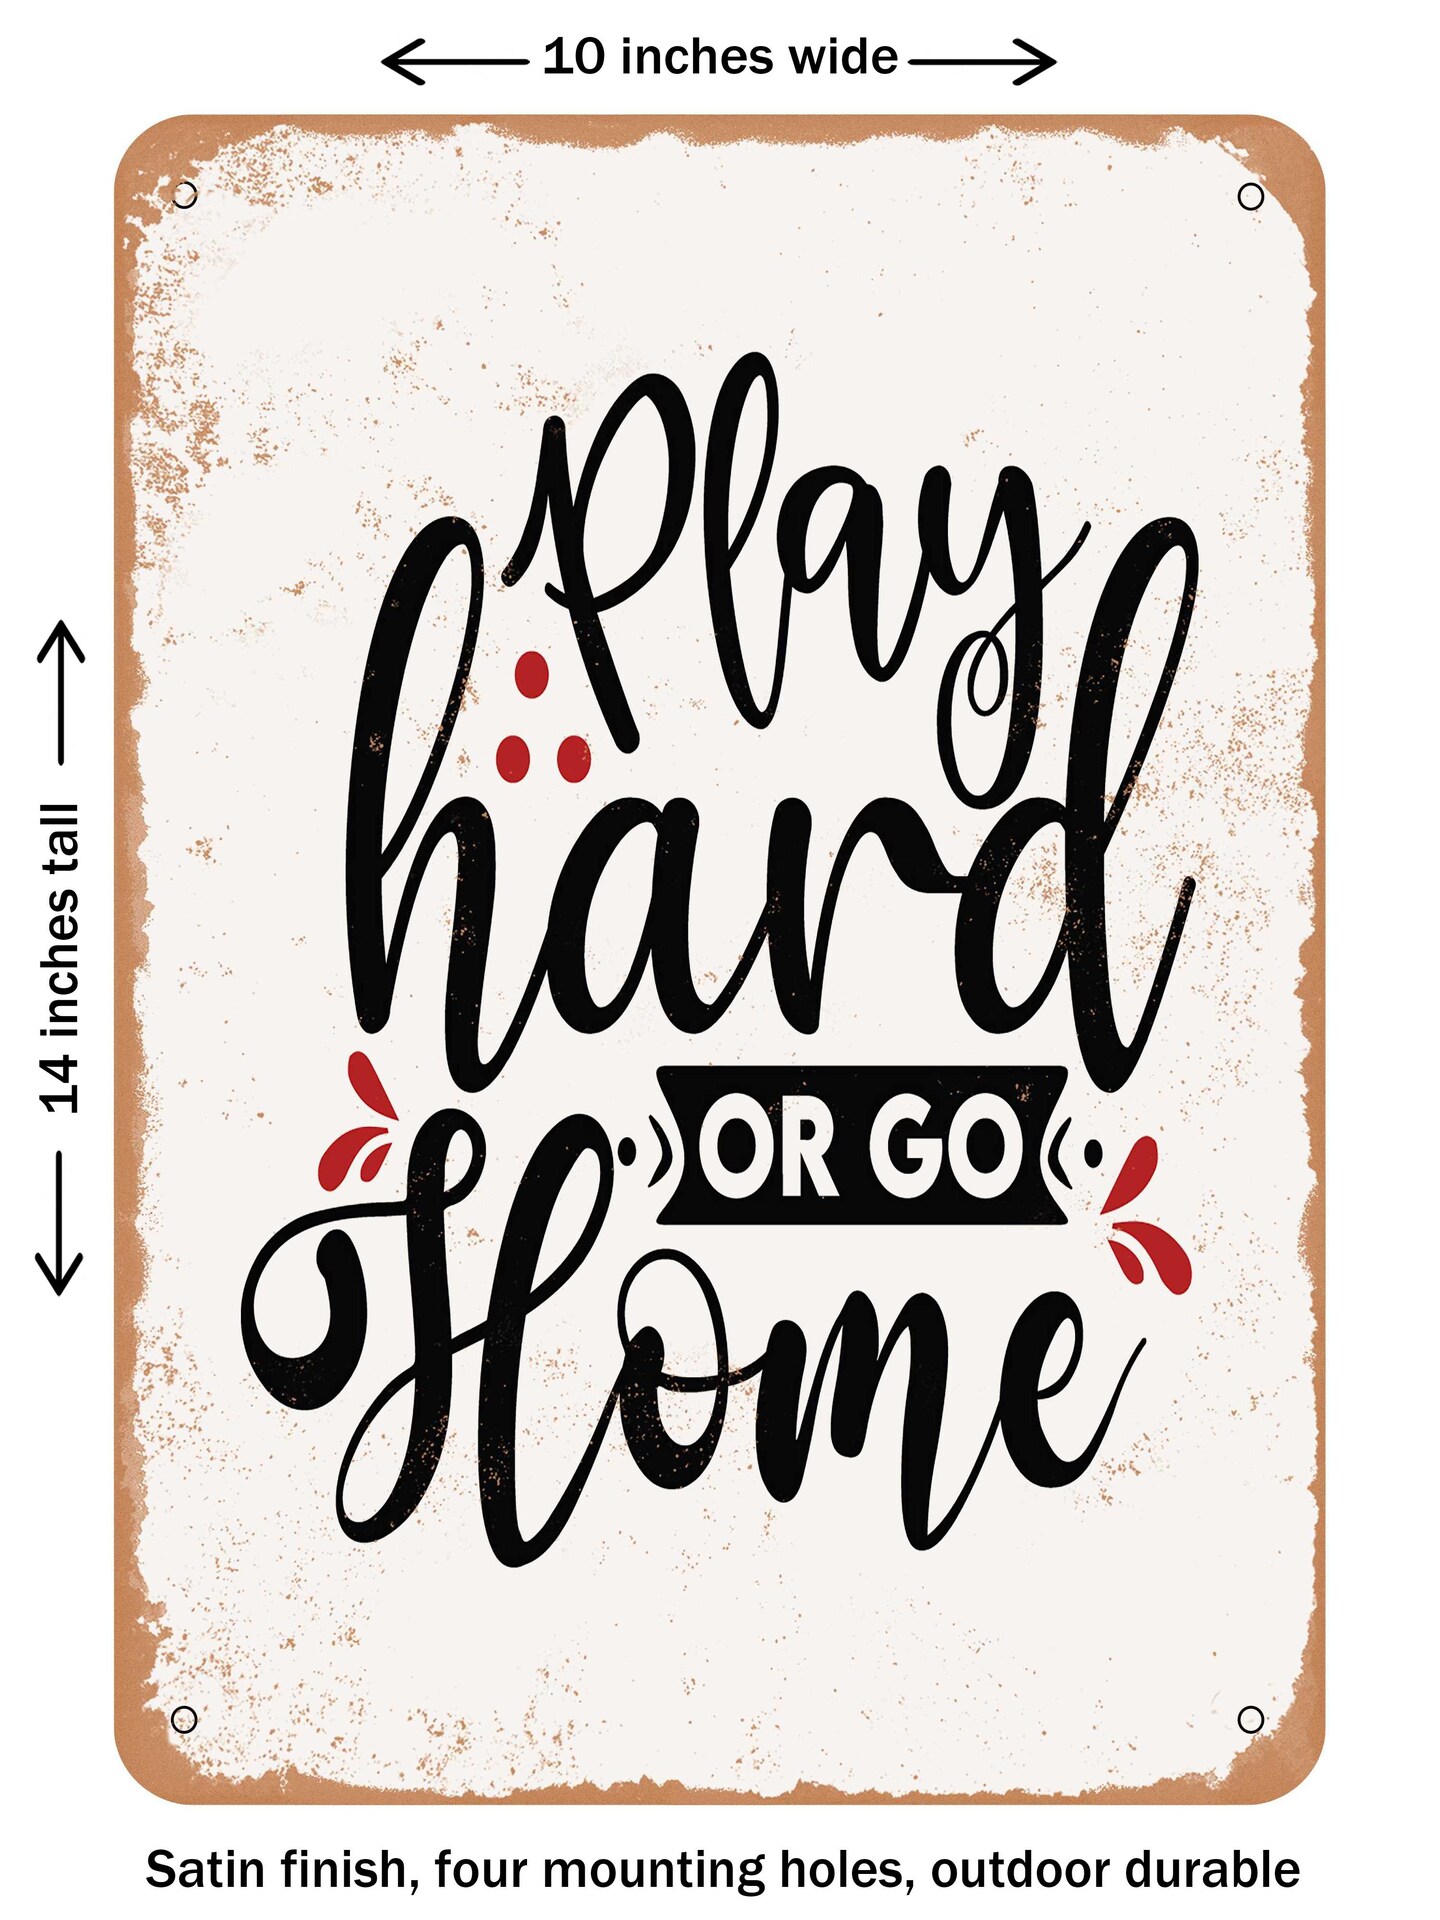 DECORATIVE METAL SIGN - Play Hard or Go Home  - Vintage Rusty Look